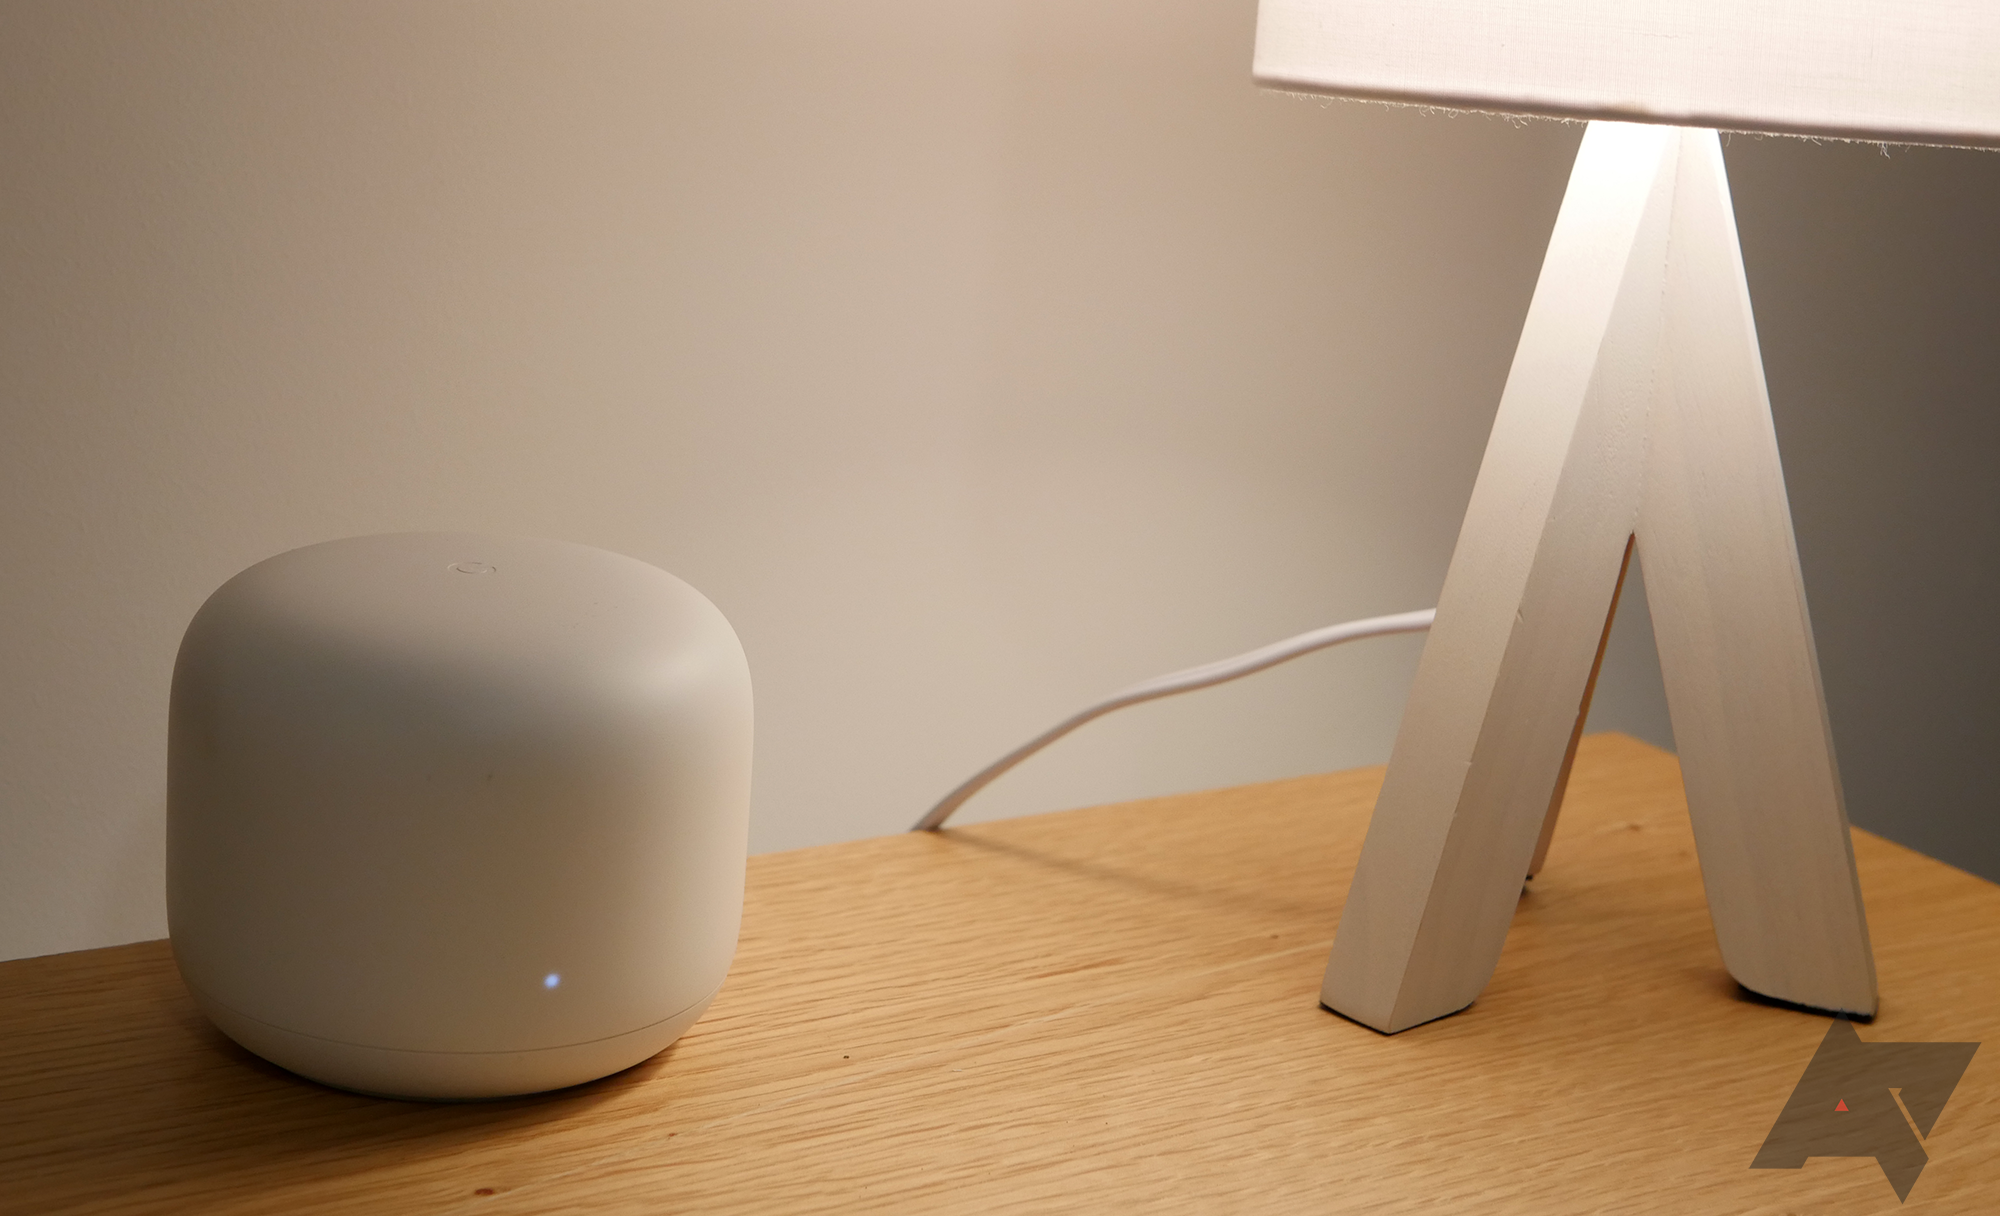 image of a gogle wi-fi router on table next to lamp